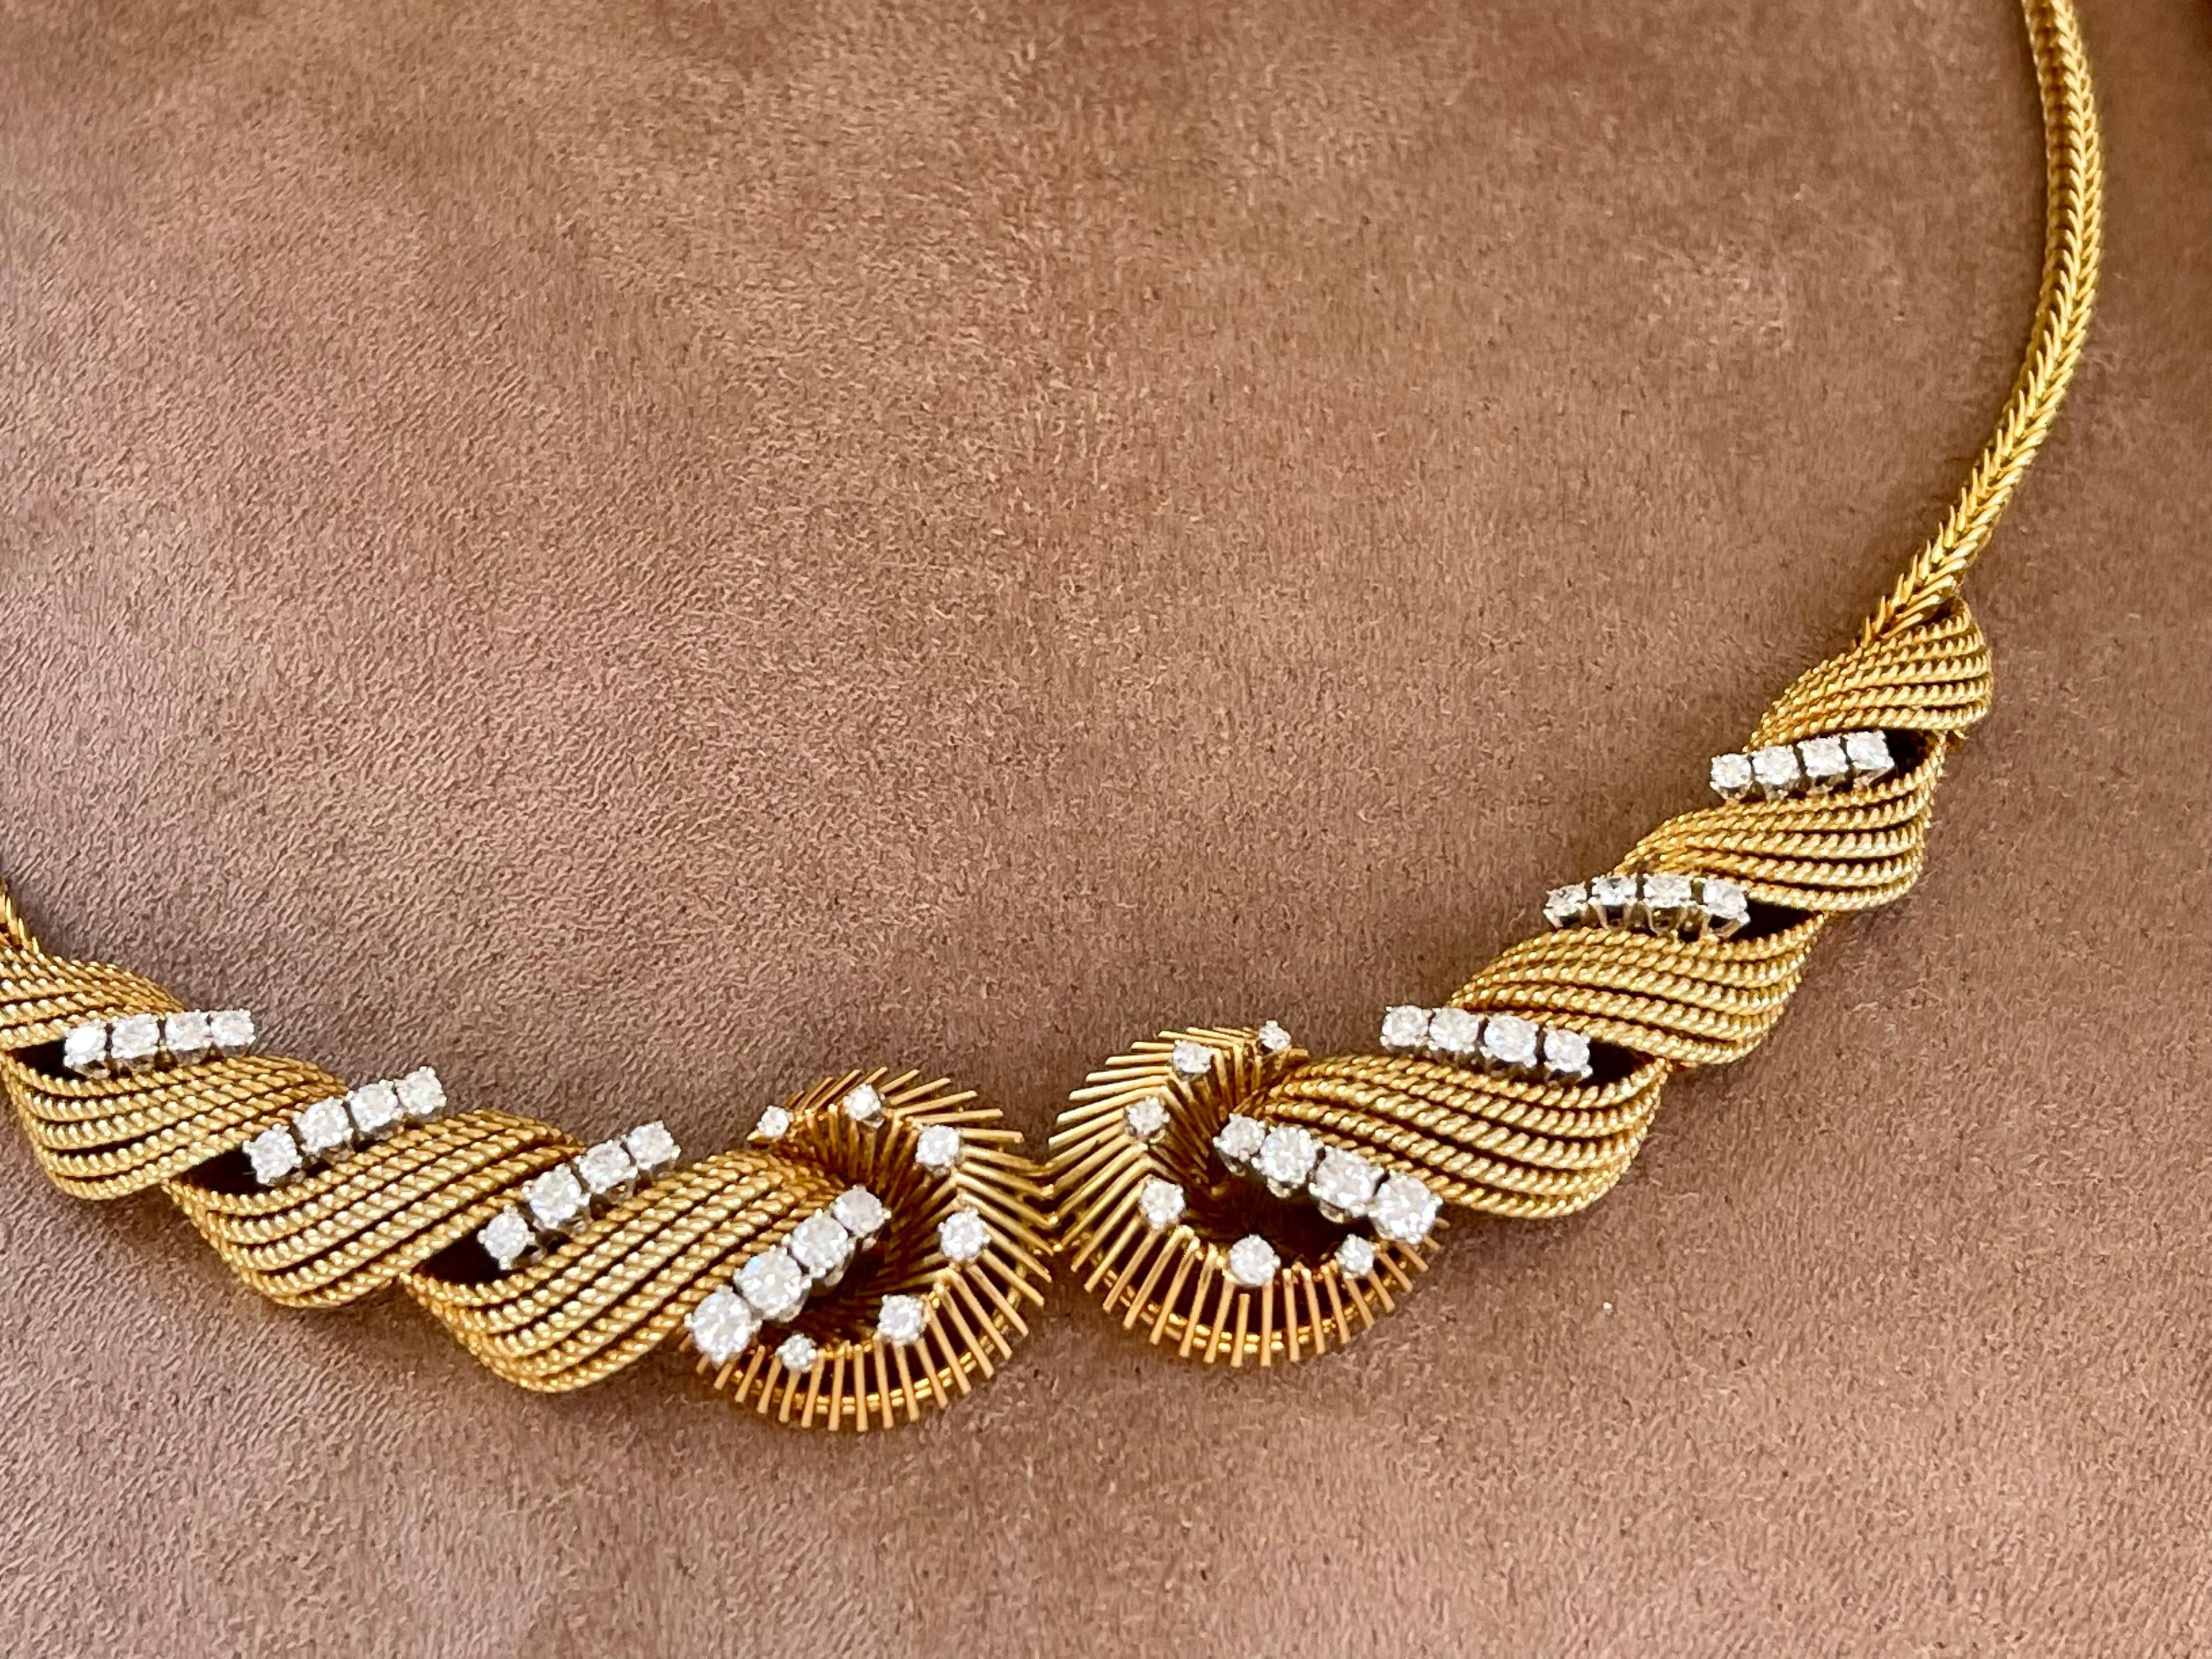 A mid twentieth century 18 K yellow Gold necklace of twist design accented with 44 brilliant cut diamonds weighing approximately 1.82 ct, G color, vs clarity.  Length ca. 43 cm. 
Weight: 41.63 grams. Signed Bucherer Switzerland. 
Masterfully